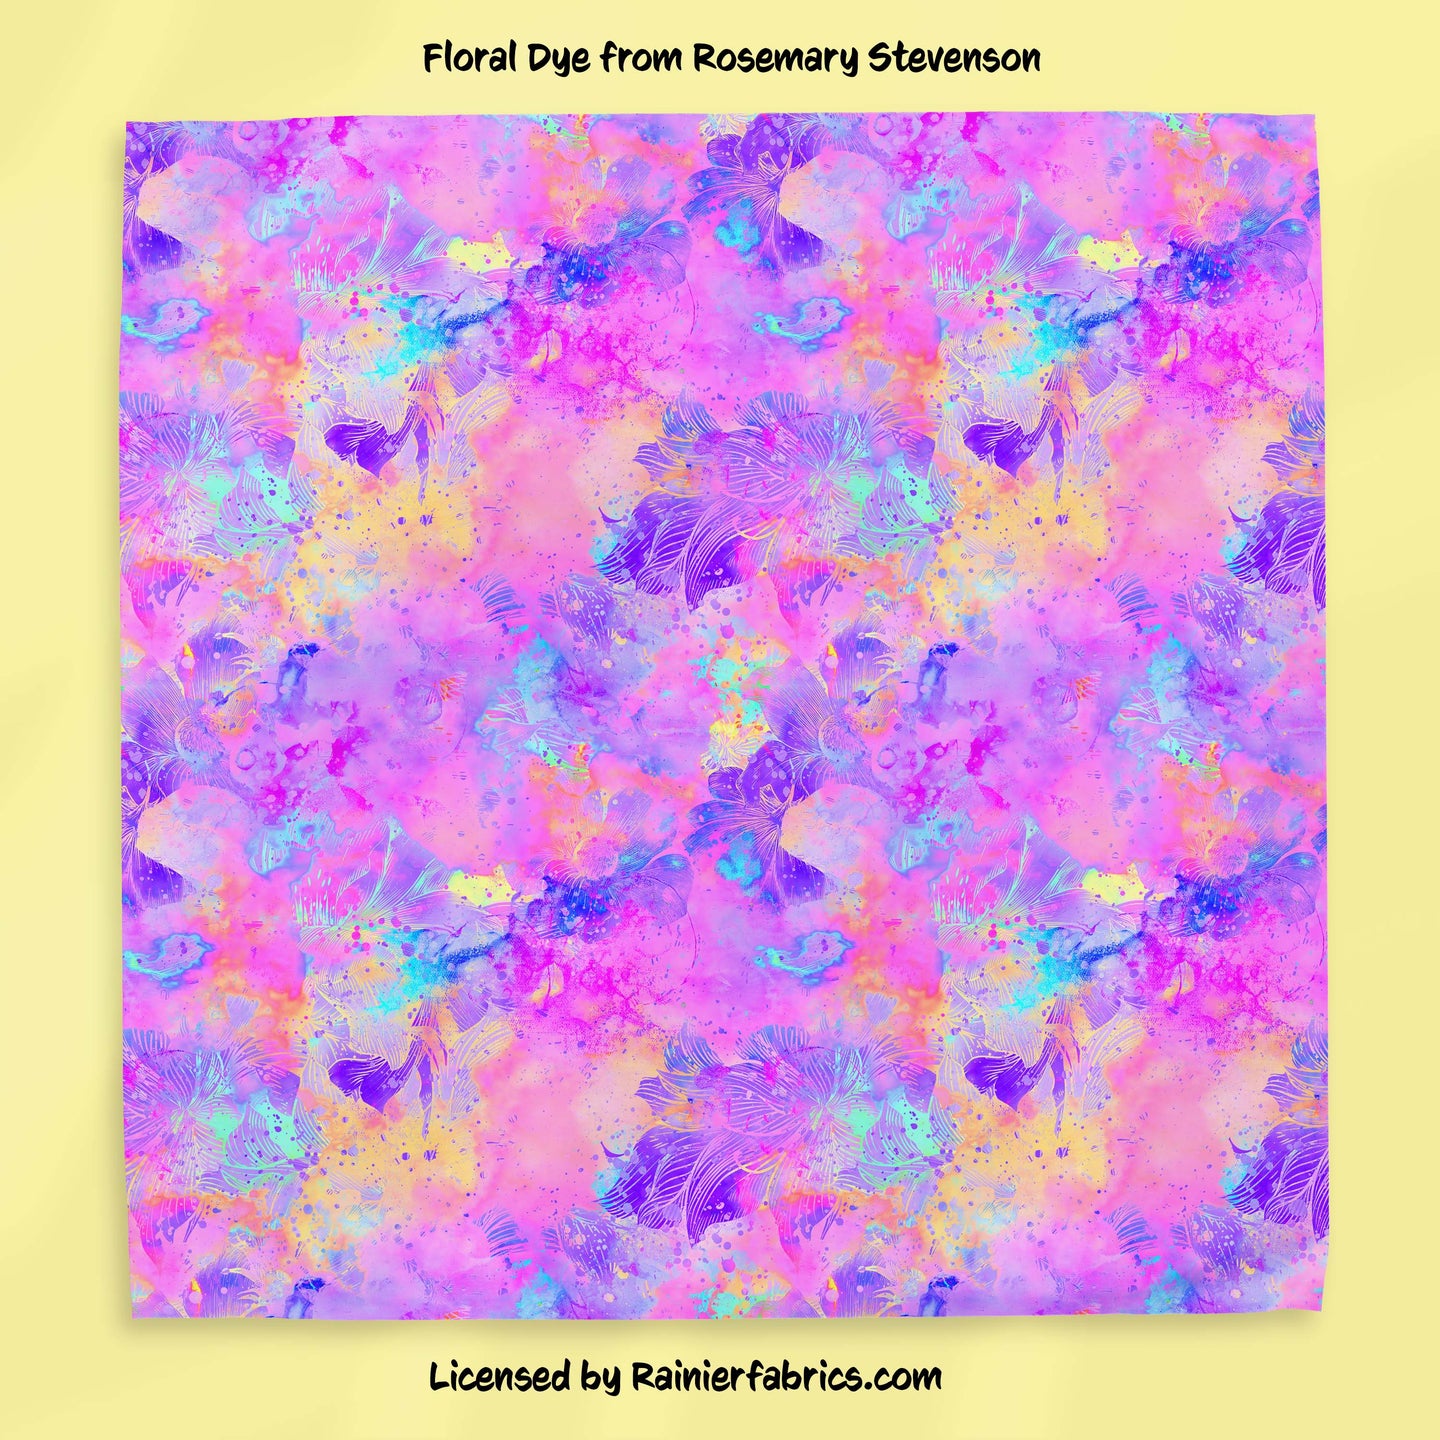 Floral Dye by Rosemary Stevenson - 2-5 day TAT - Order by 1/2 yard; Blankets and towels available too